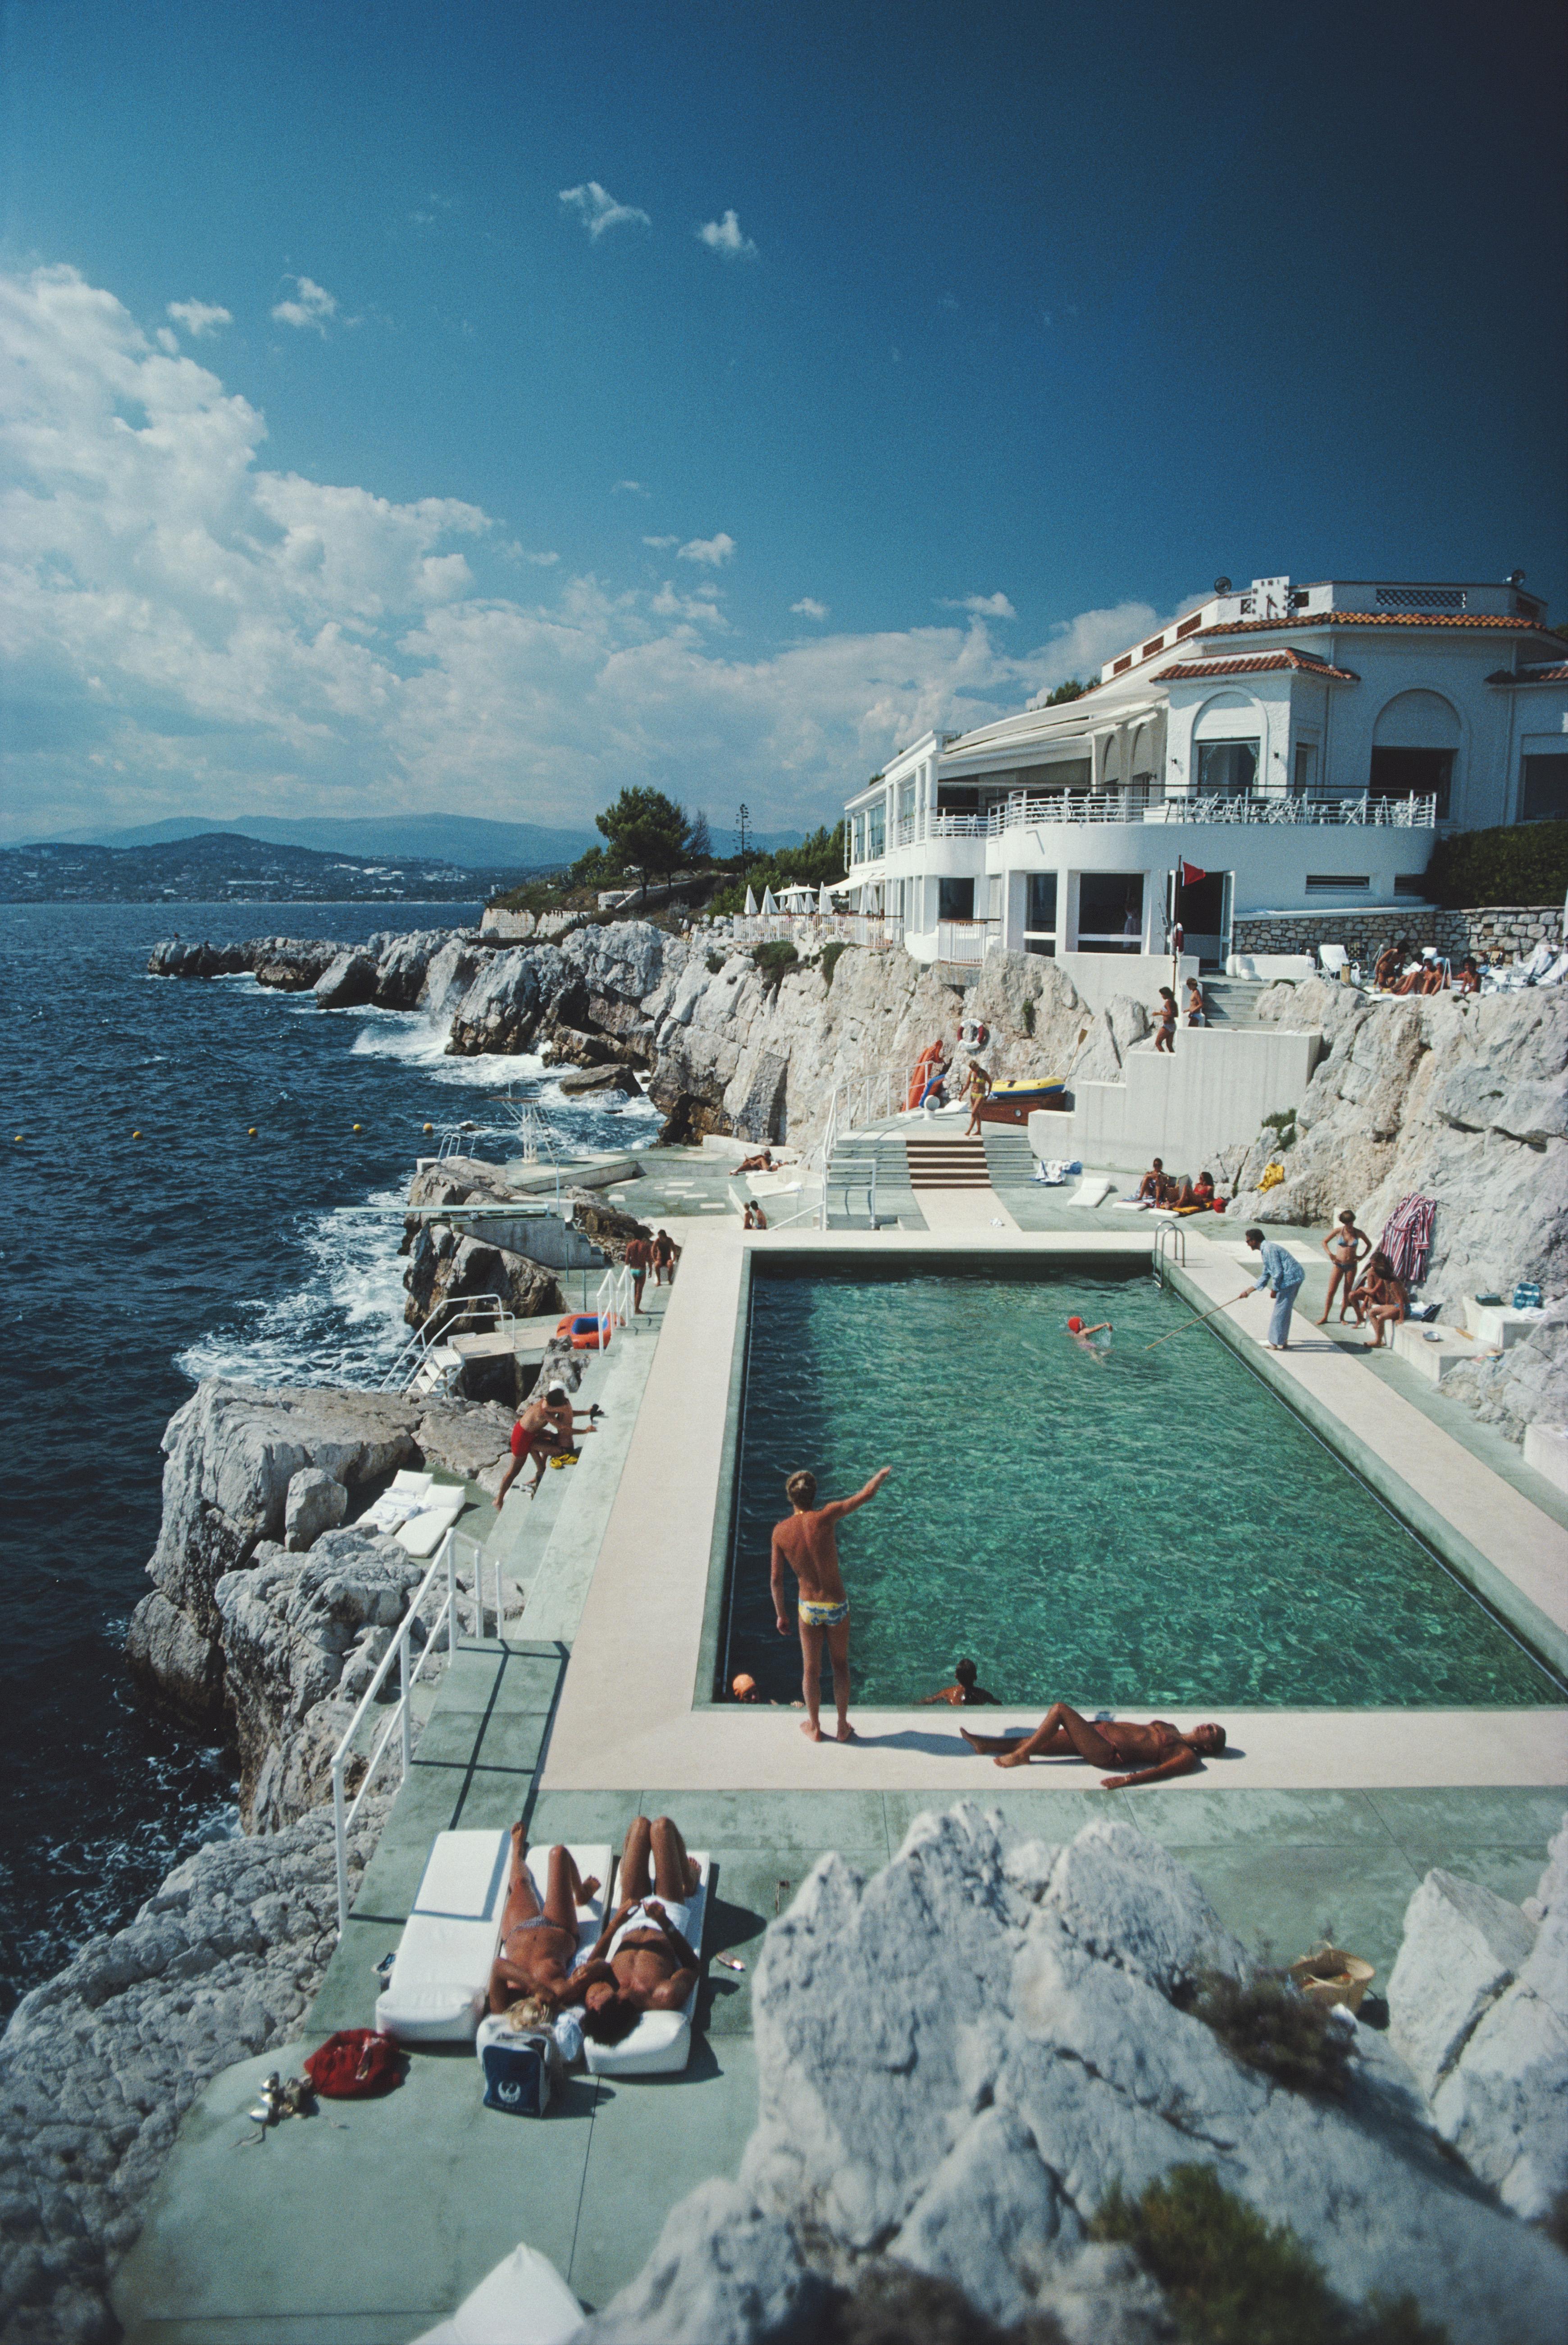 'Eden-Roc Pool' 1976 Slim Aarons Limited Estate Edition Print 
Guests round the swimming pool at the Hotel du Cap Eden-Roc, Antibes, France, August 1976.

Slim Aarons Chromogenic C print 
Printed Later 
Slim Aarons Estate Edition 
Produced utilising